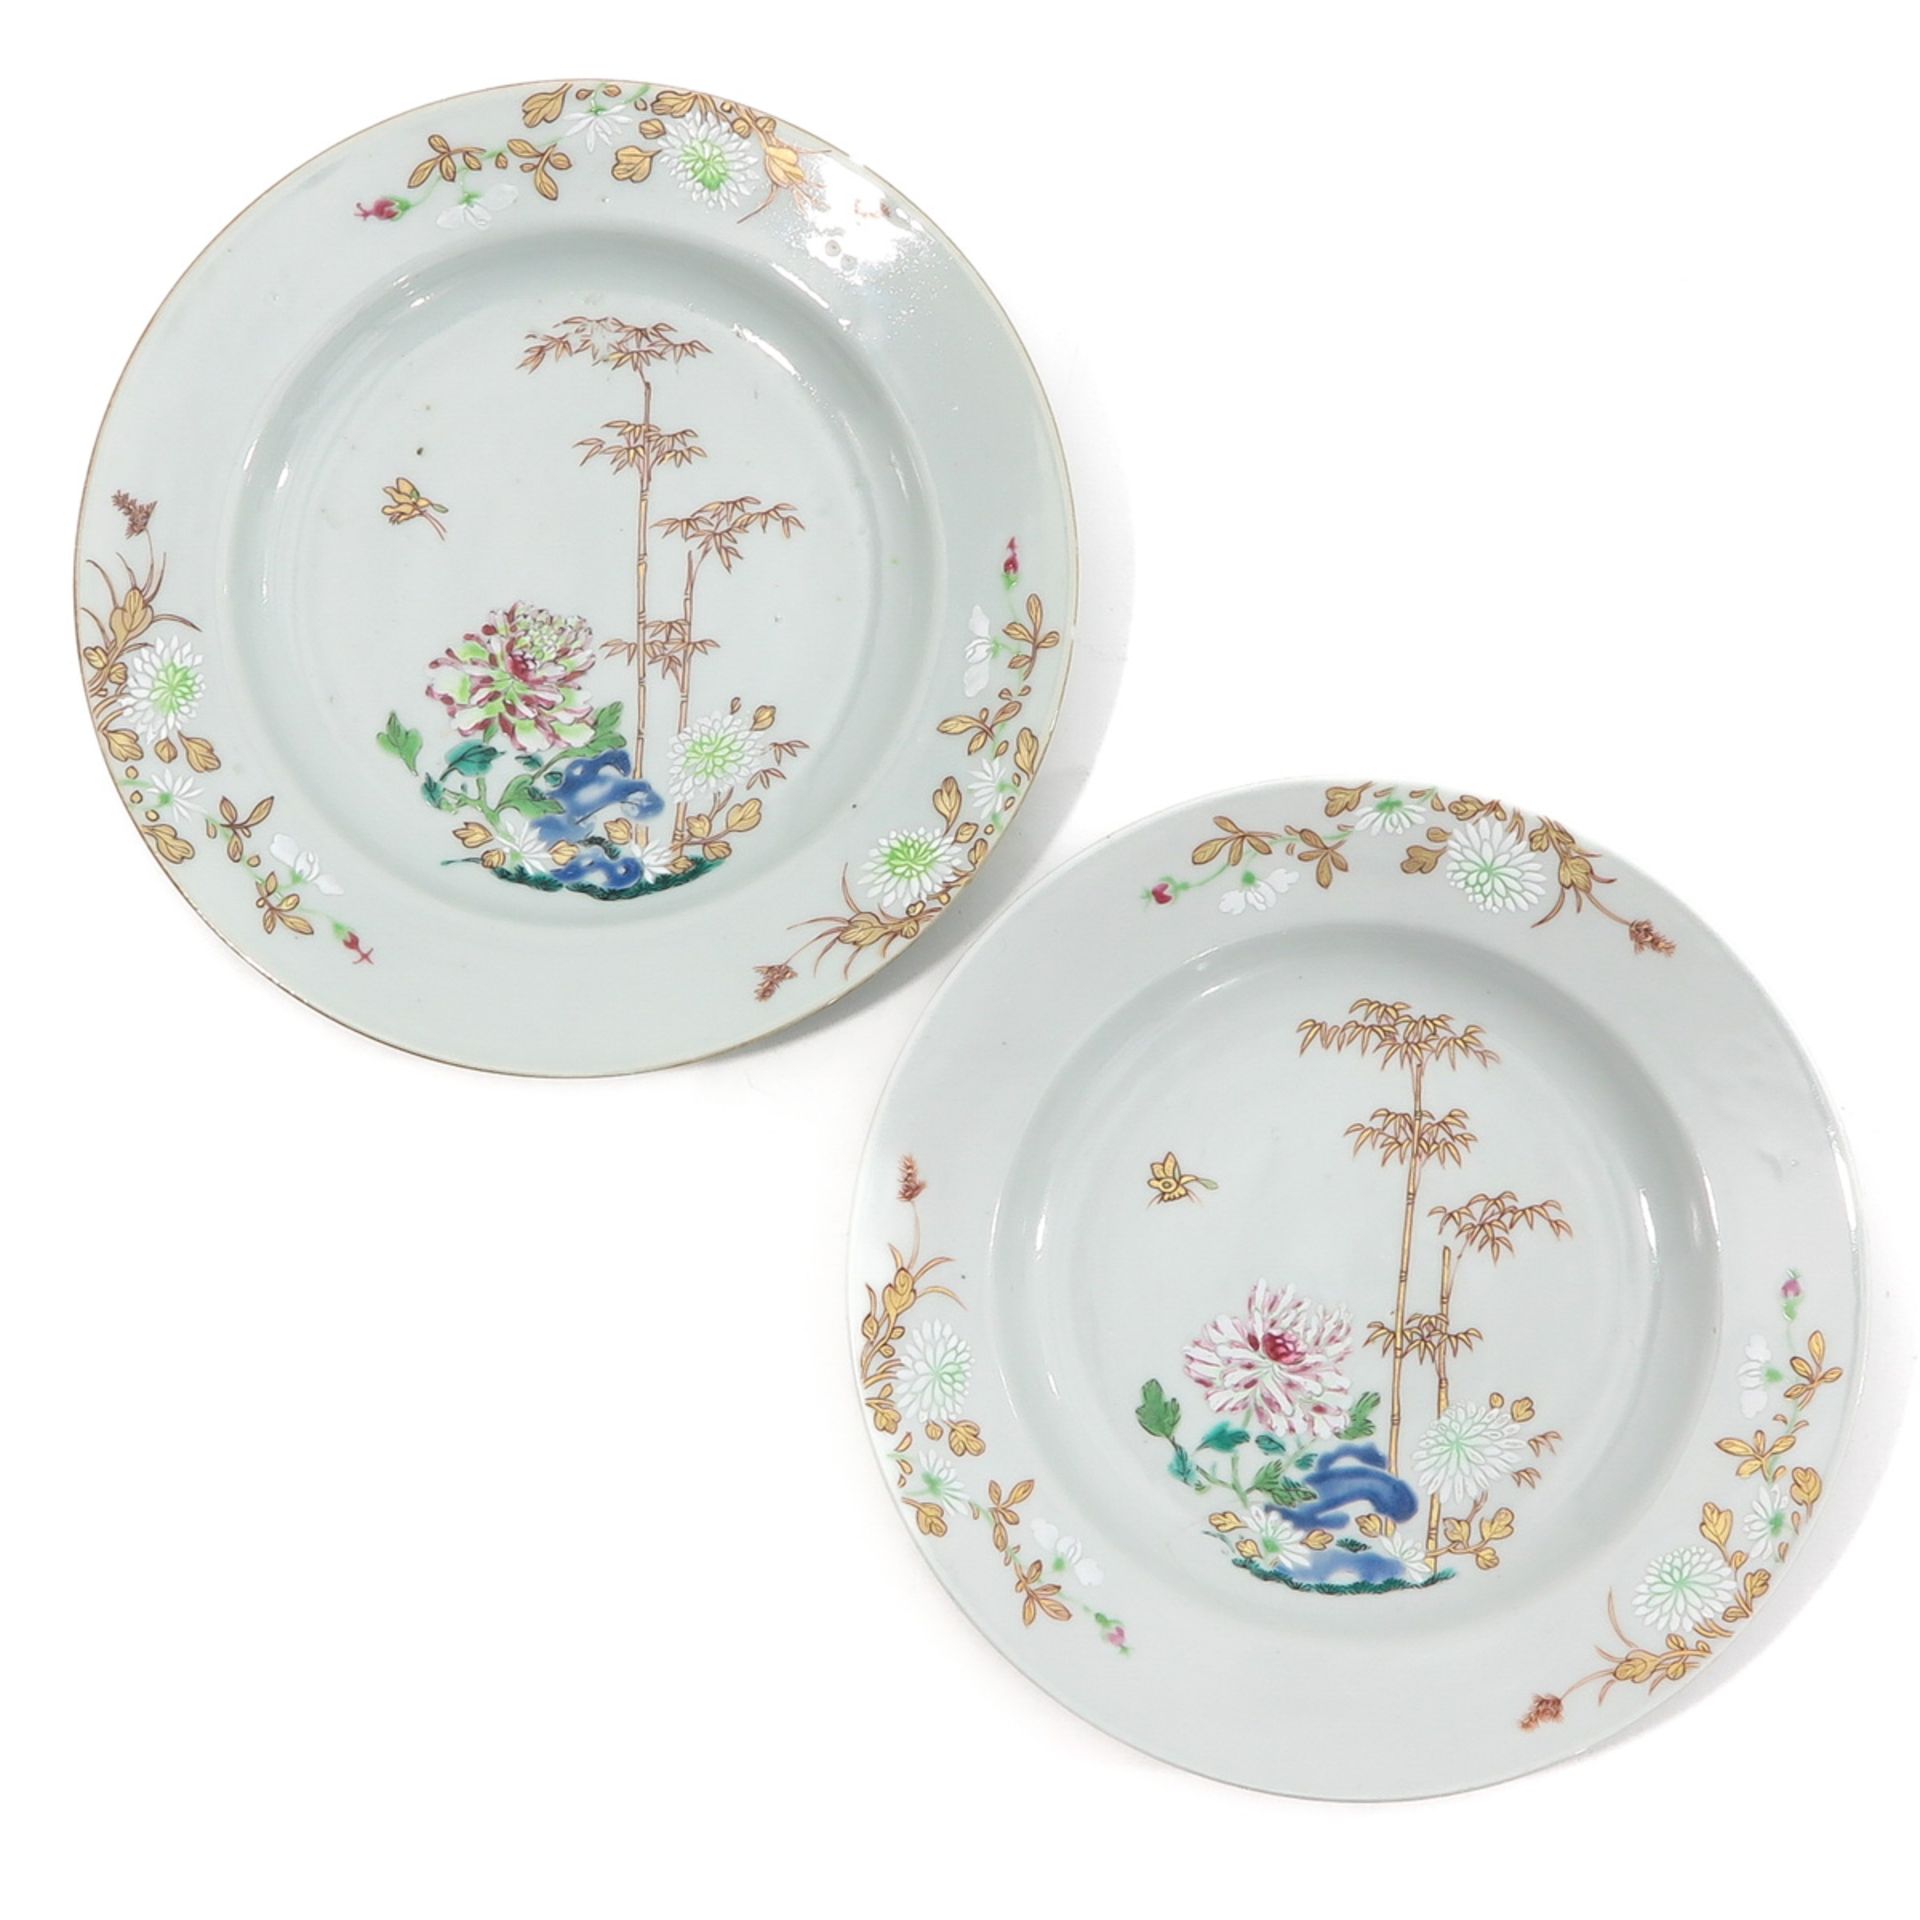 A Collection of 5 Famille Rose Plates - Bild 3 aus 10